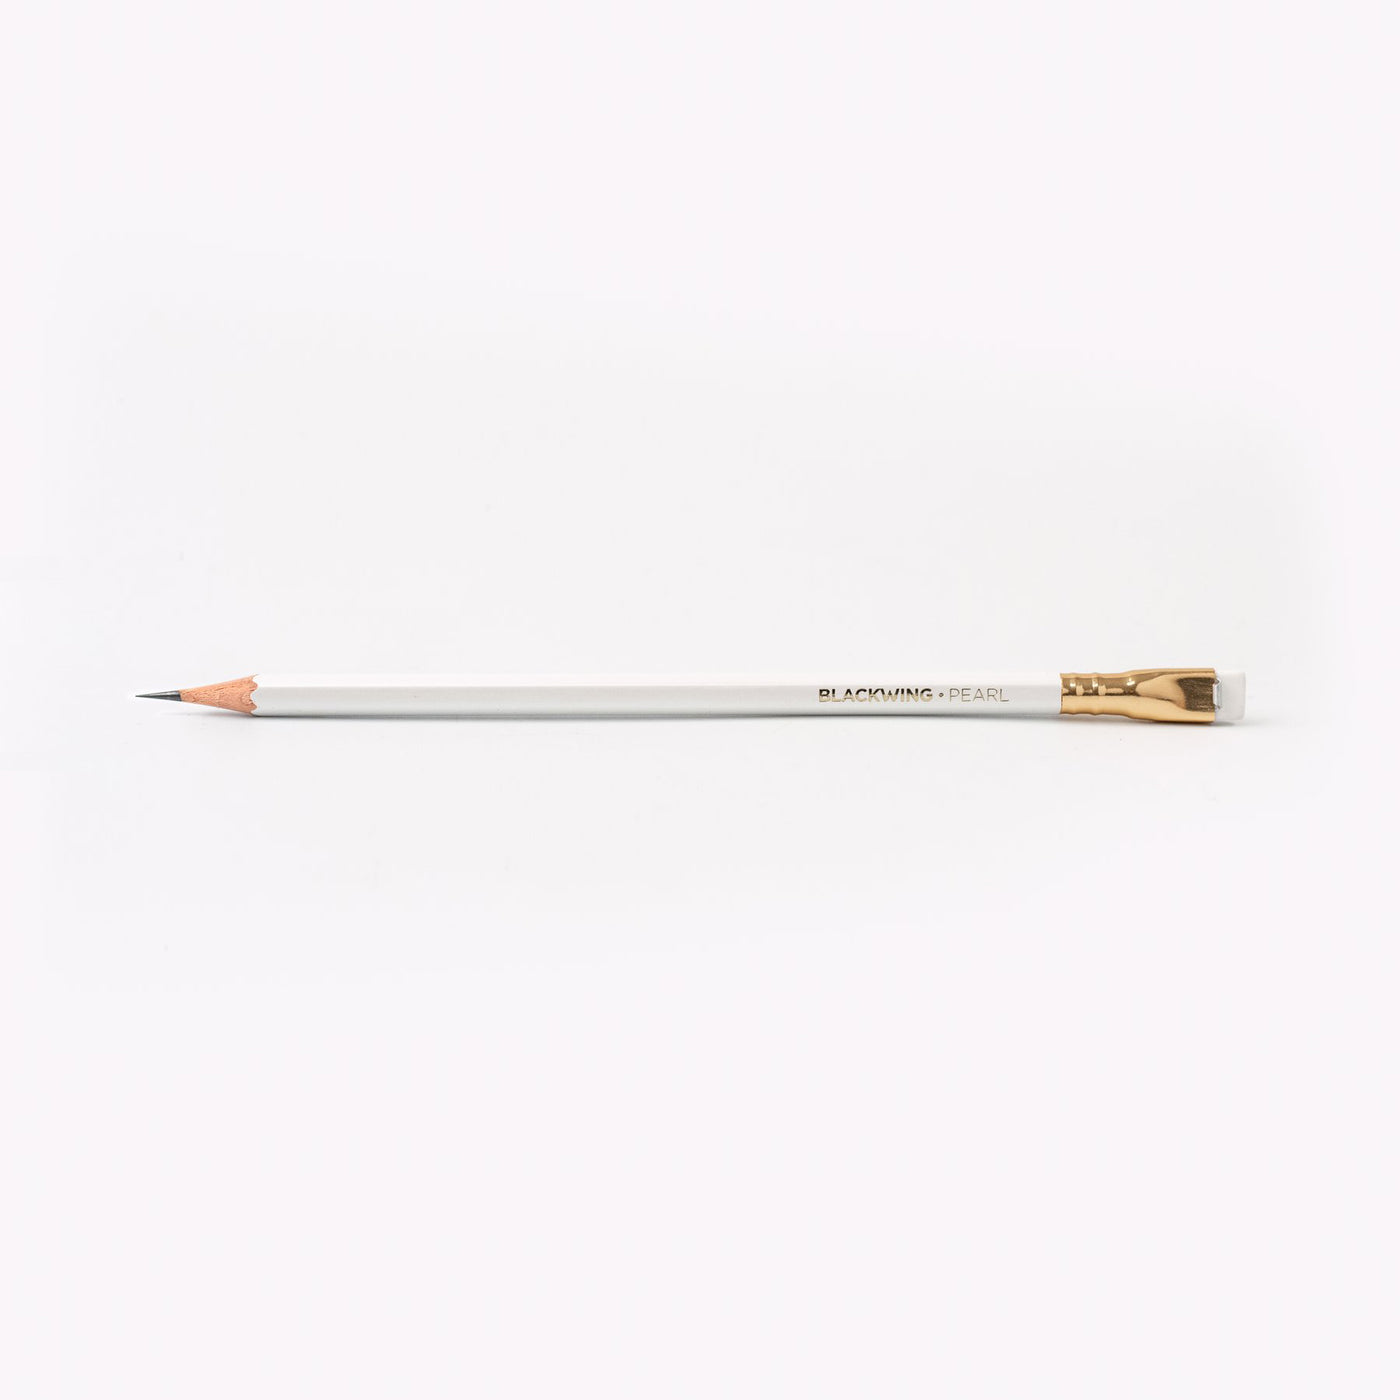 Single Blackwing Pencil - Pearl White